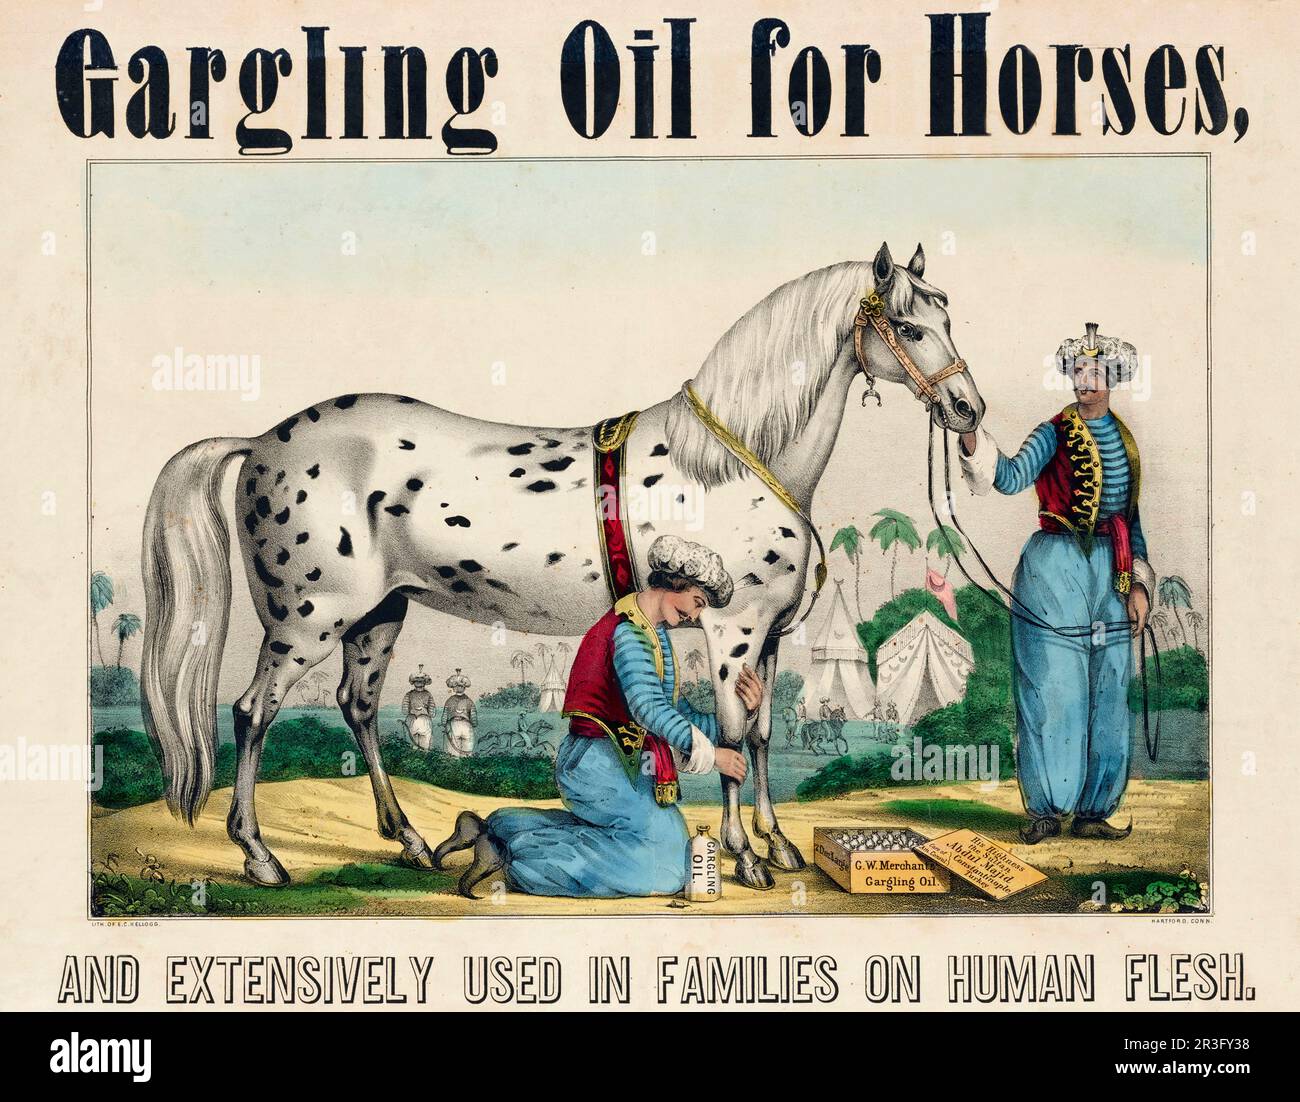 Vintage advertisement for horse gargling oil sold by G.W. Merchants. Stock Photo